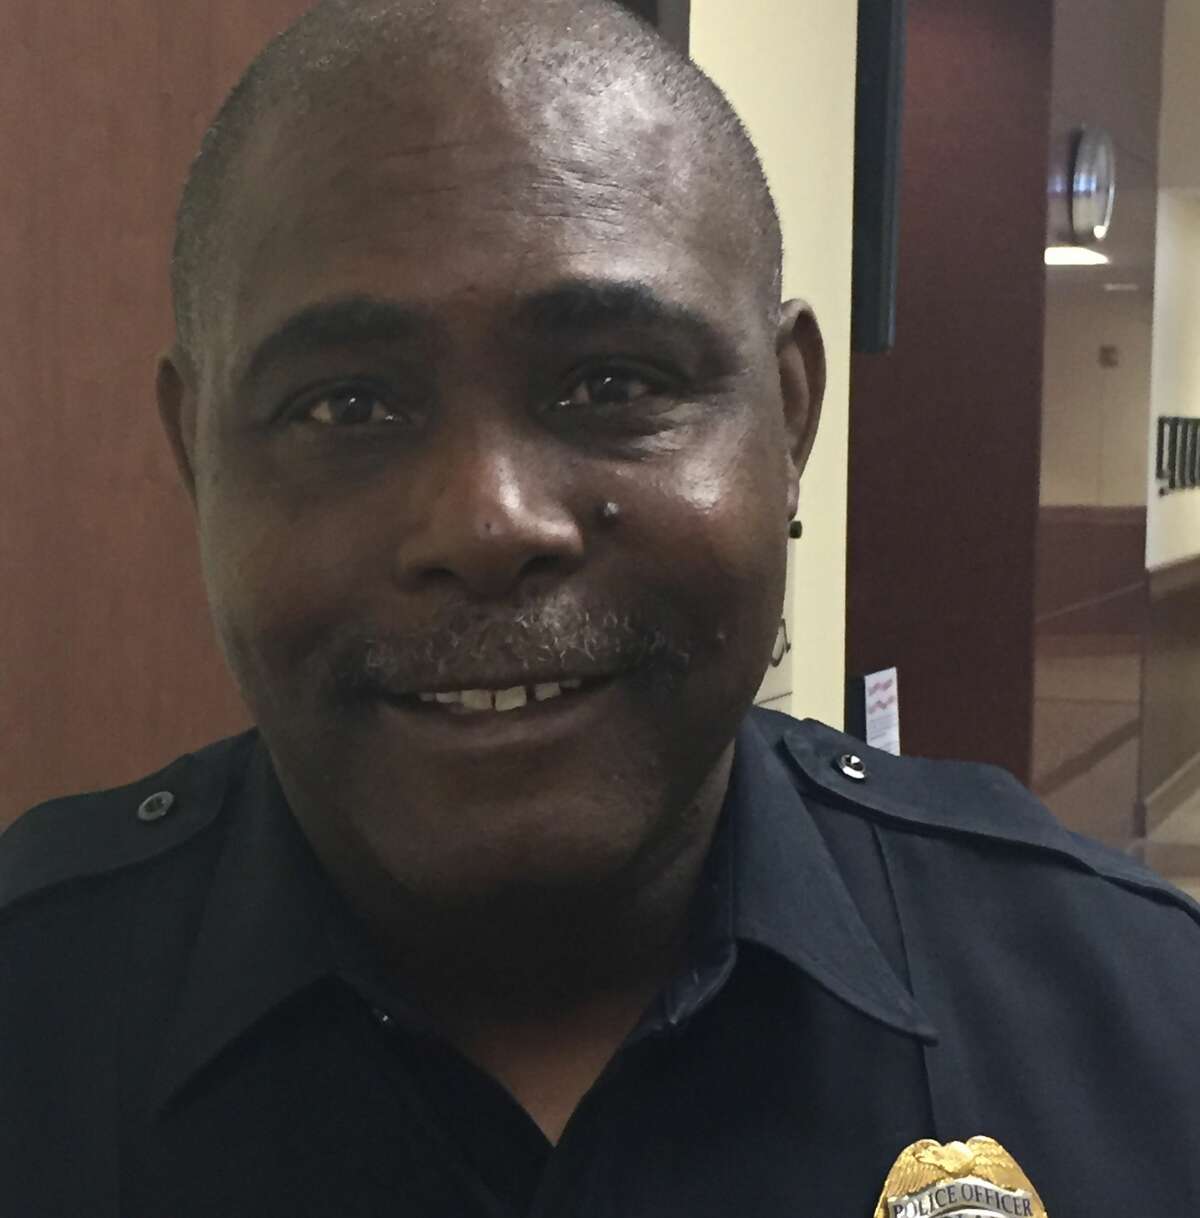 The Midland County Commissioners’ Court voted Monday to appoint the Midland Police Department veteran Larry Woodruff as the temporary constable.